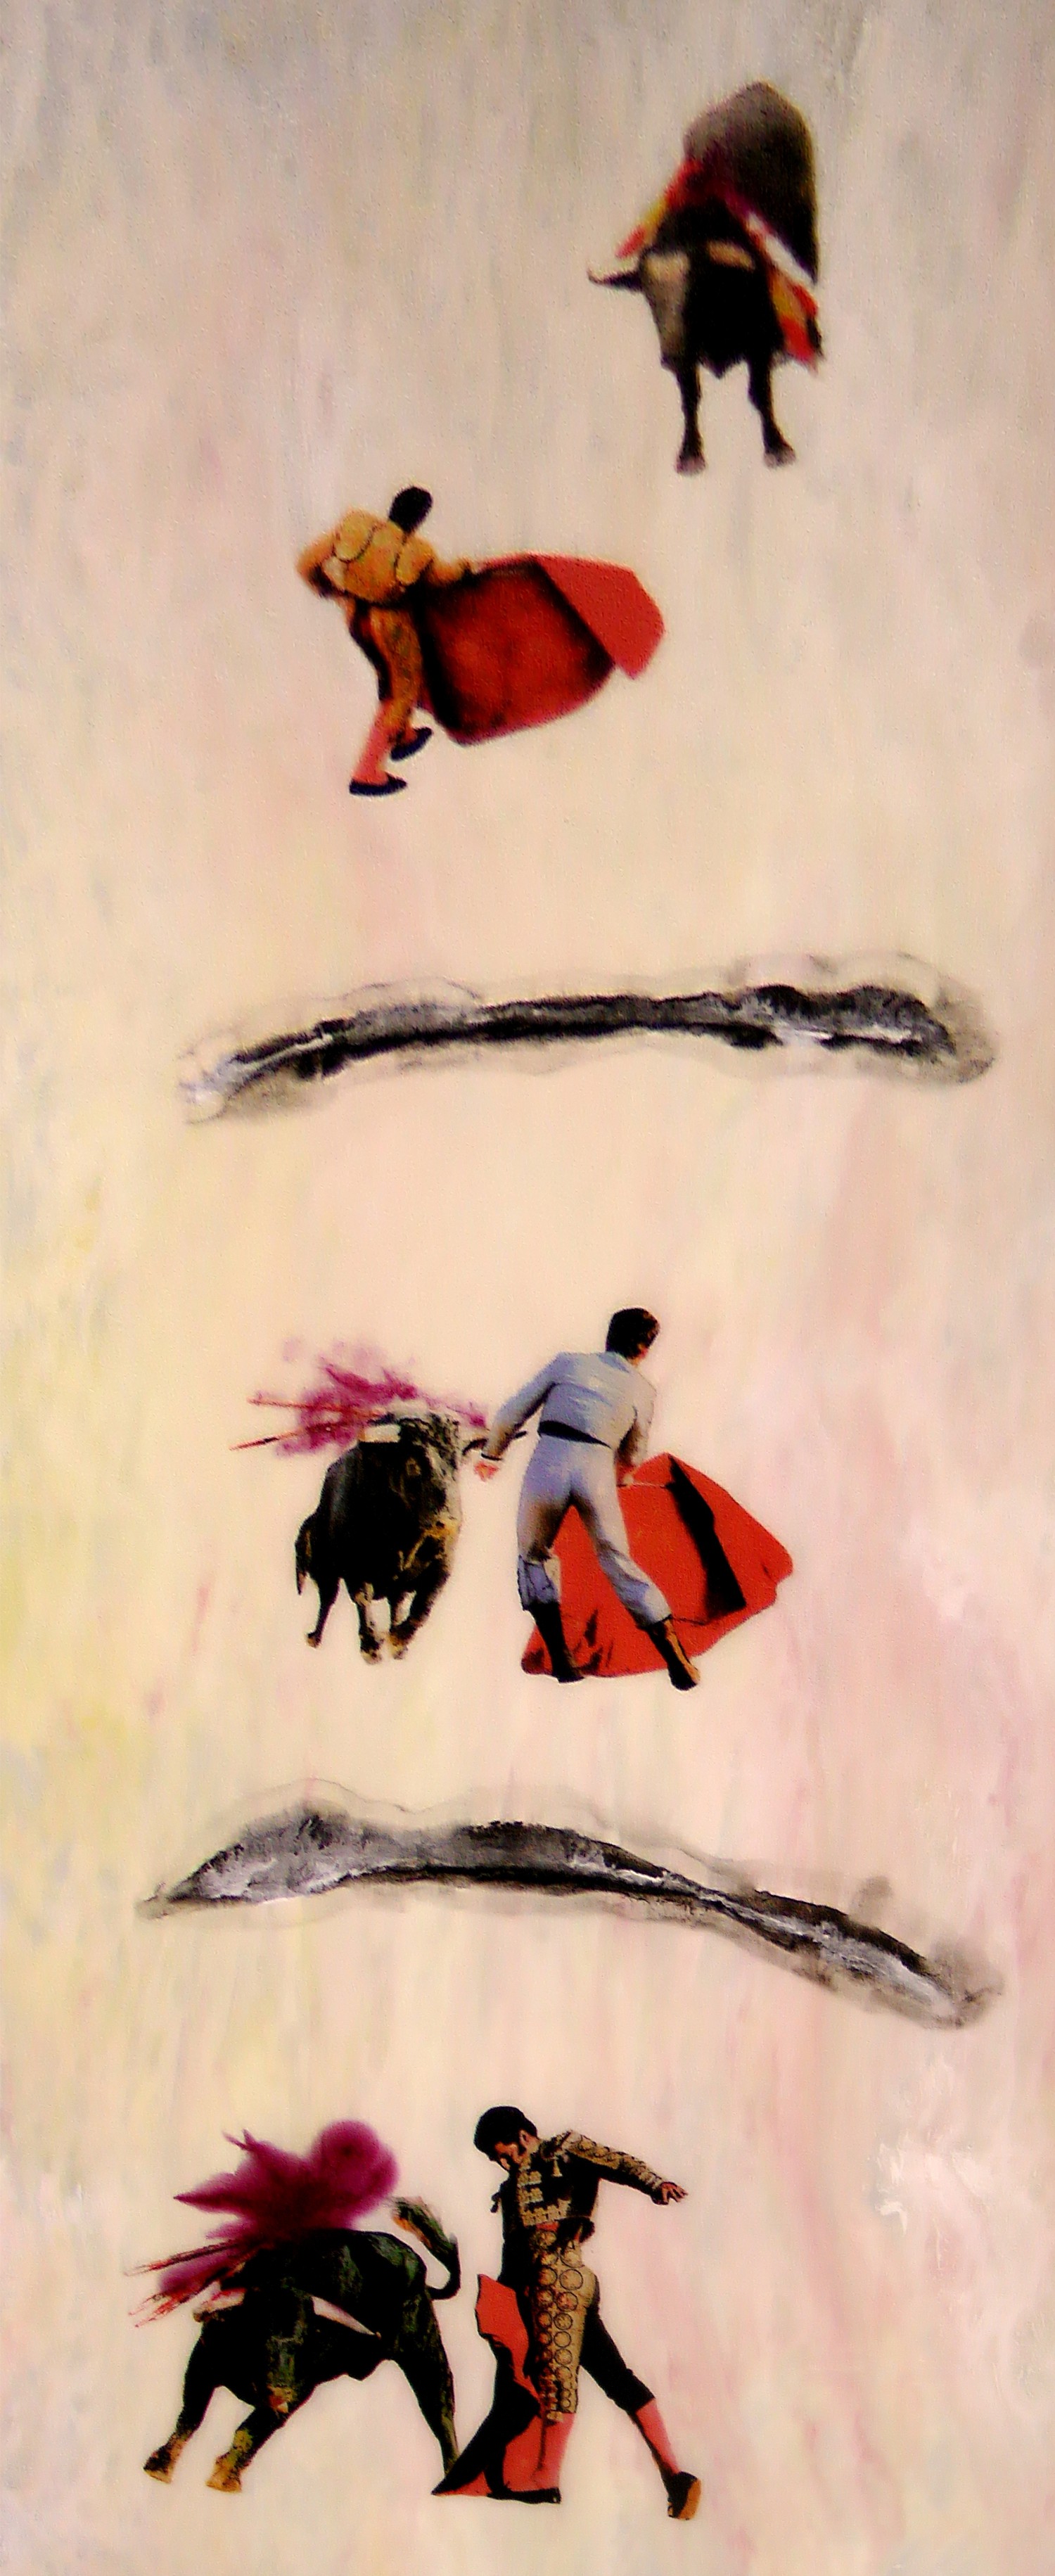 The Bullfighter, 2012 72" x 28" Mixed Media on Glass Sold